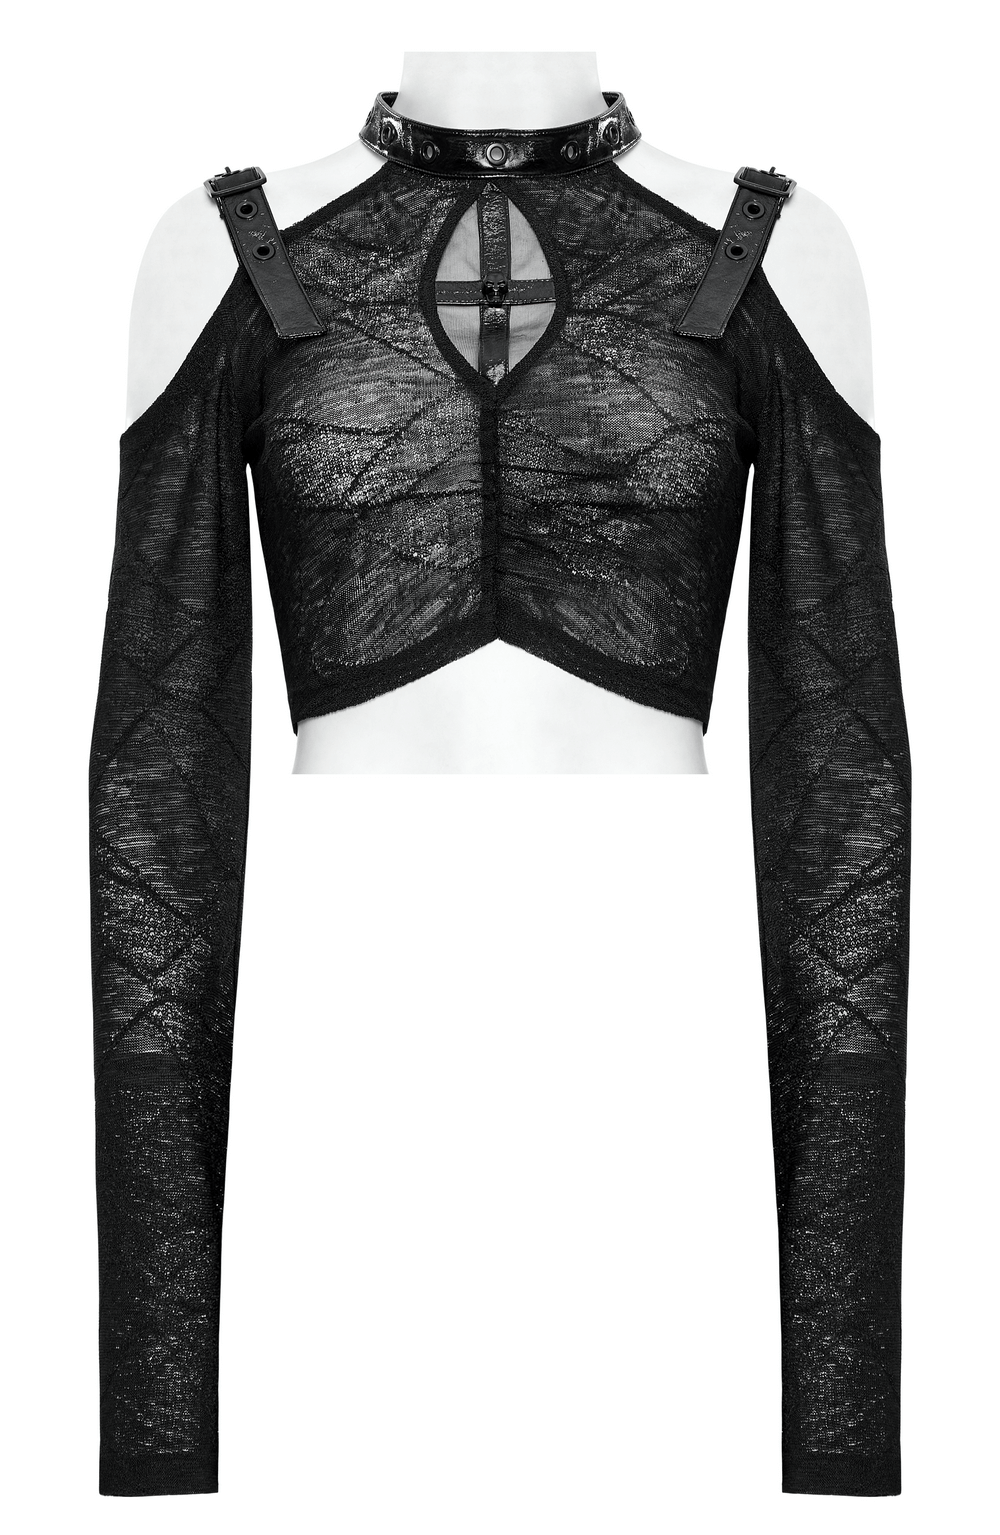 Edgy Gothic Skull Halter Top with Lace Sleeve Detailing